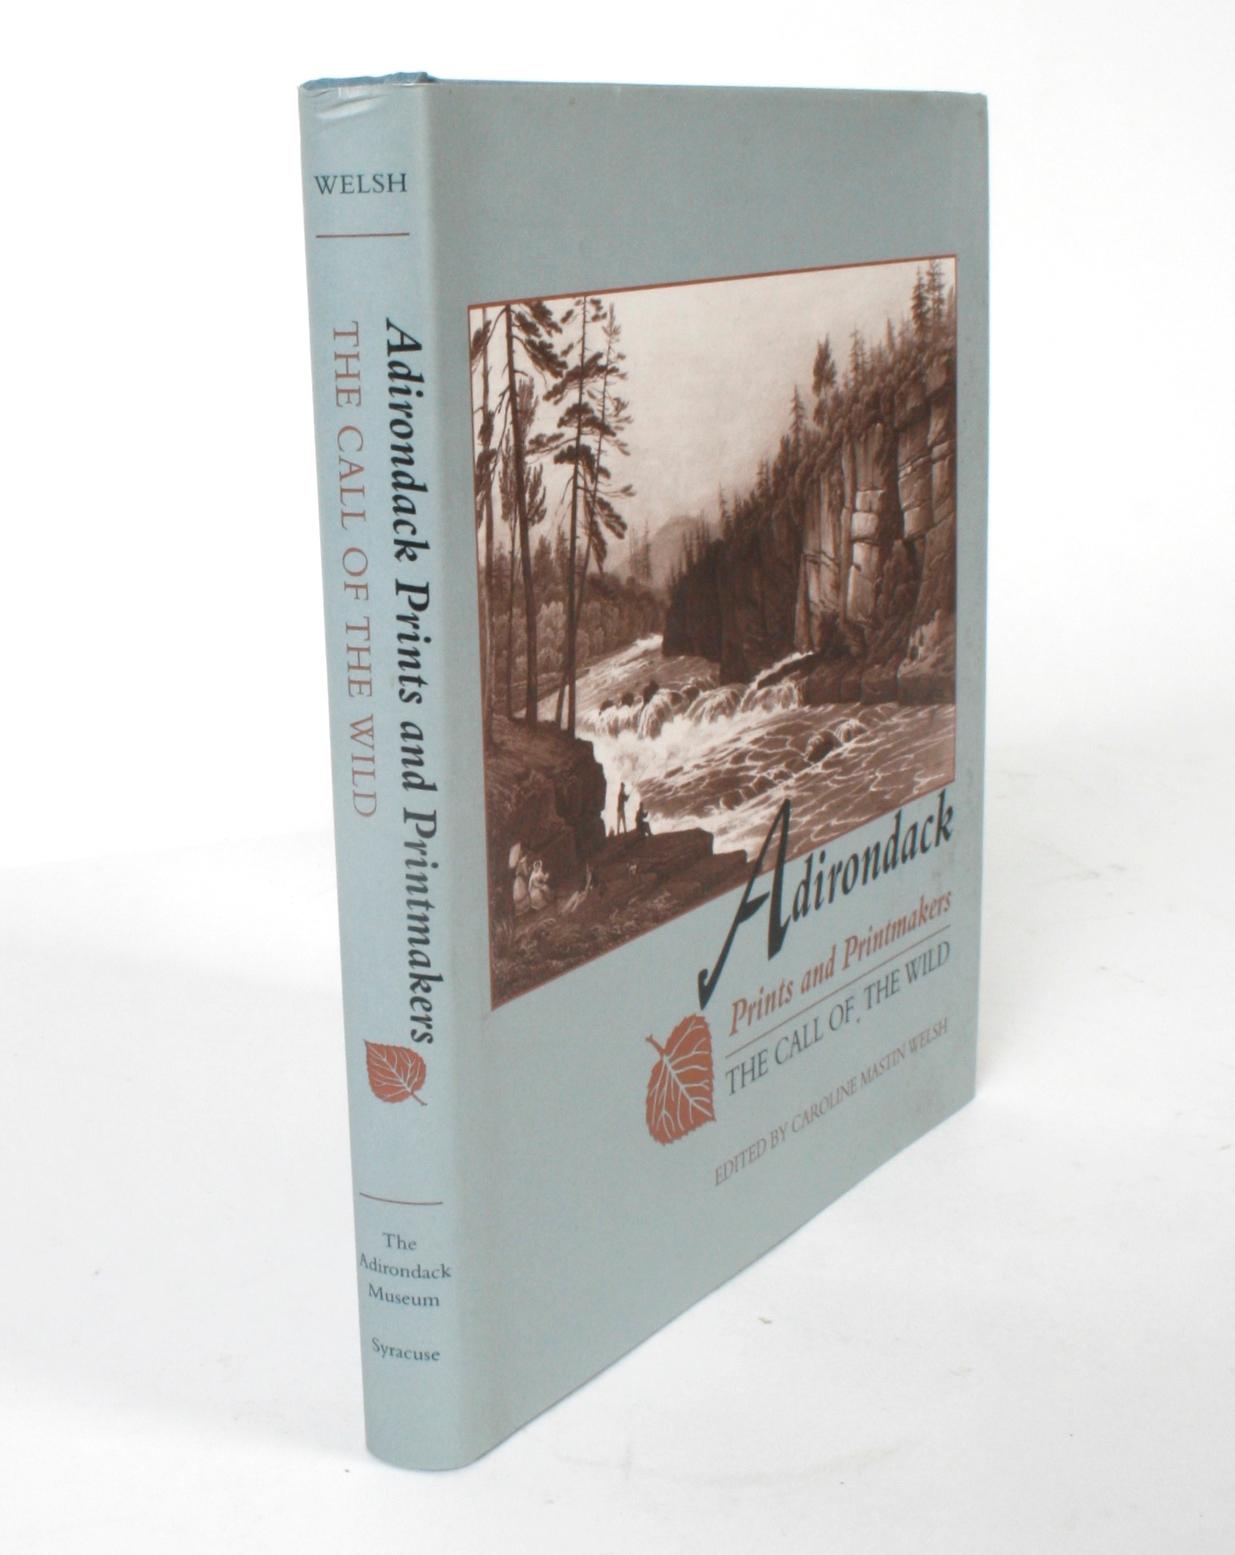 Adirondack Prints and Printmakers, The Call of the Wild, 1st Edition 14